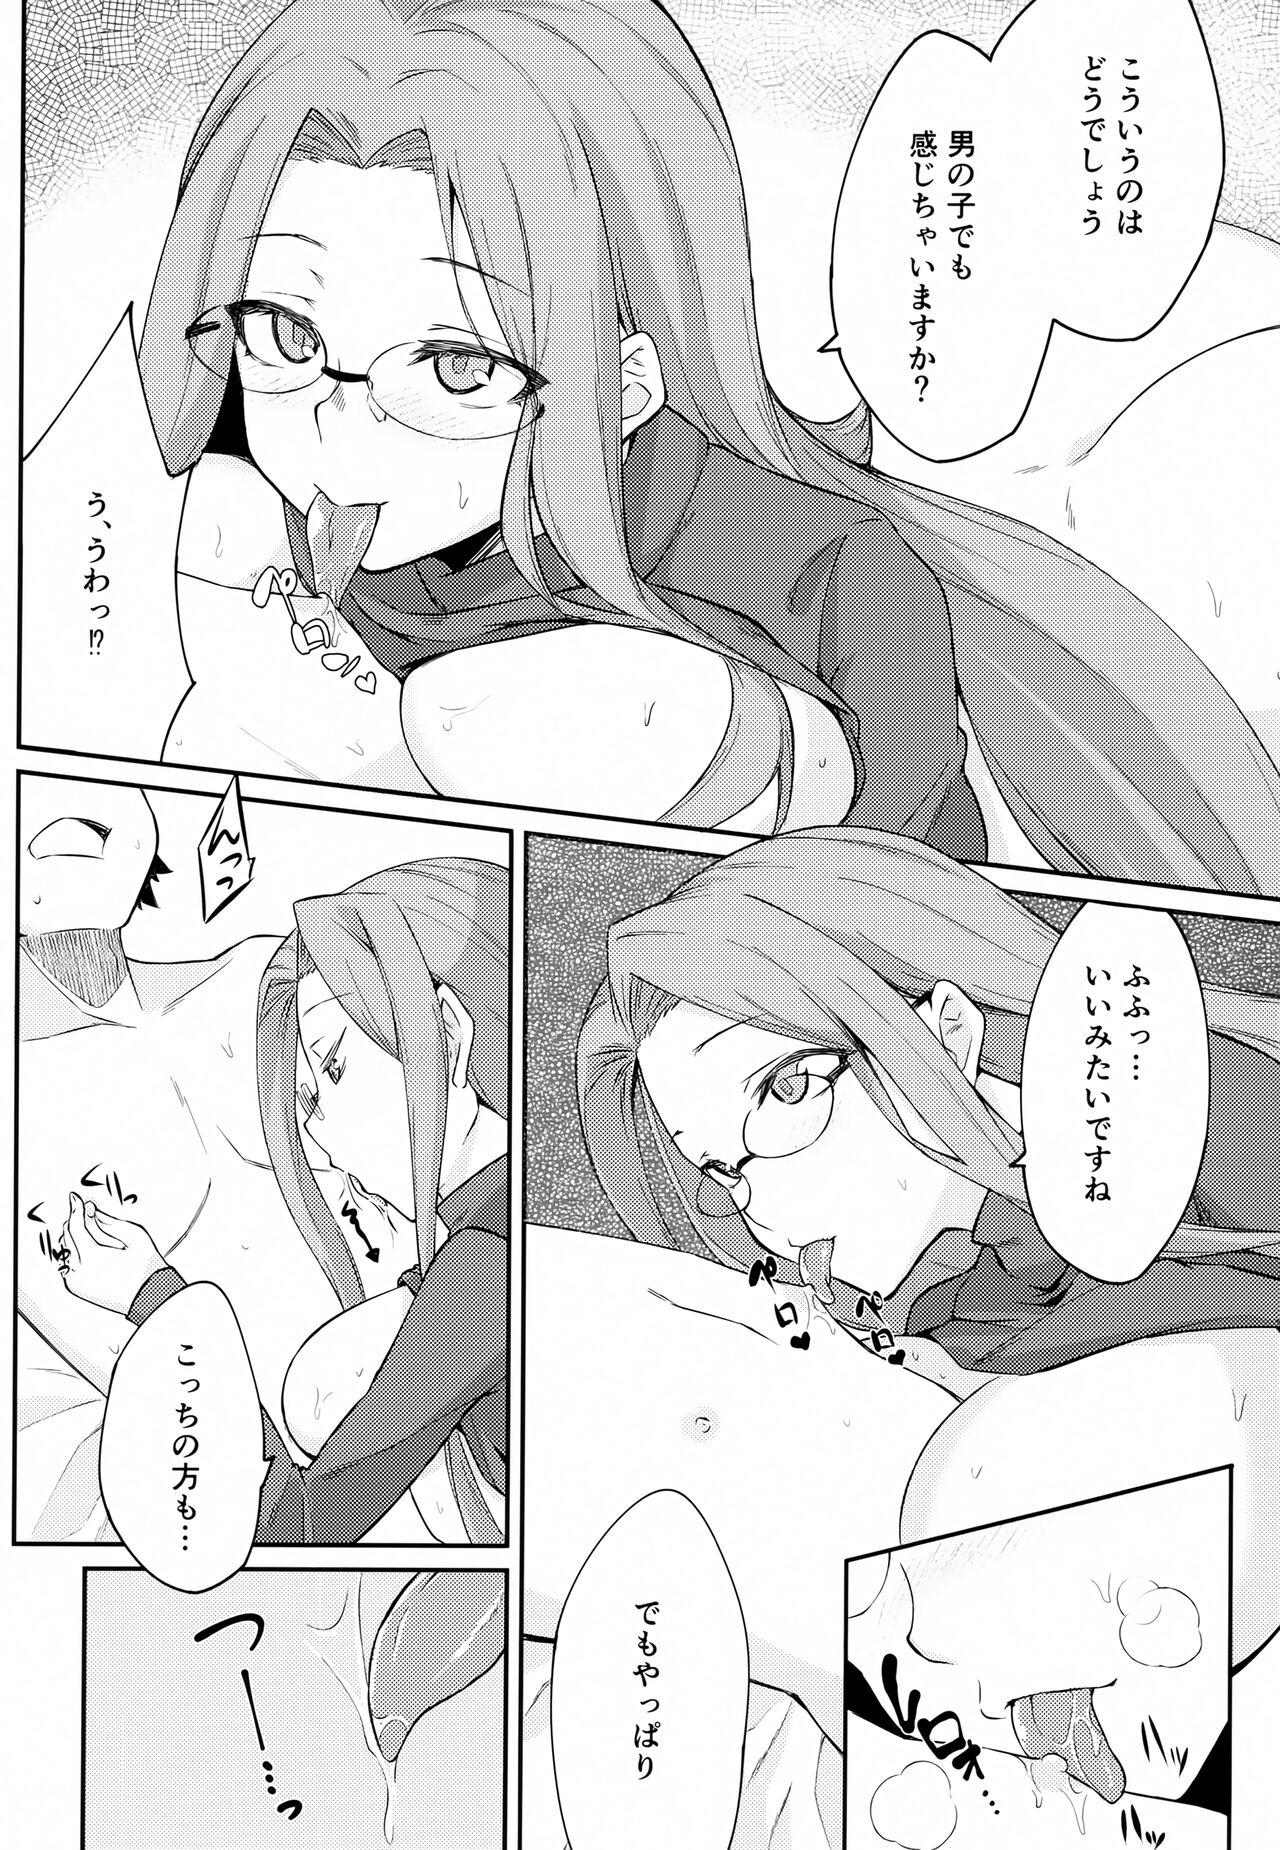 Daddy R15 - Fate stay night Lesbian Sex - Page 9